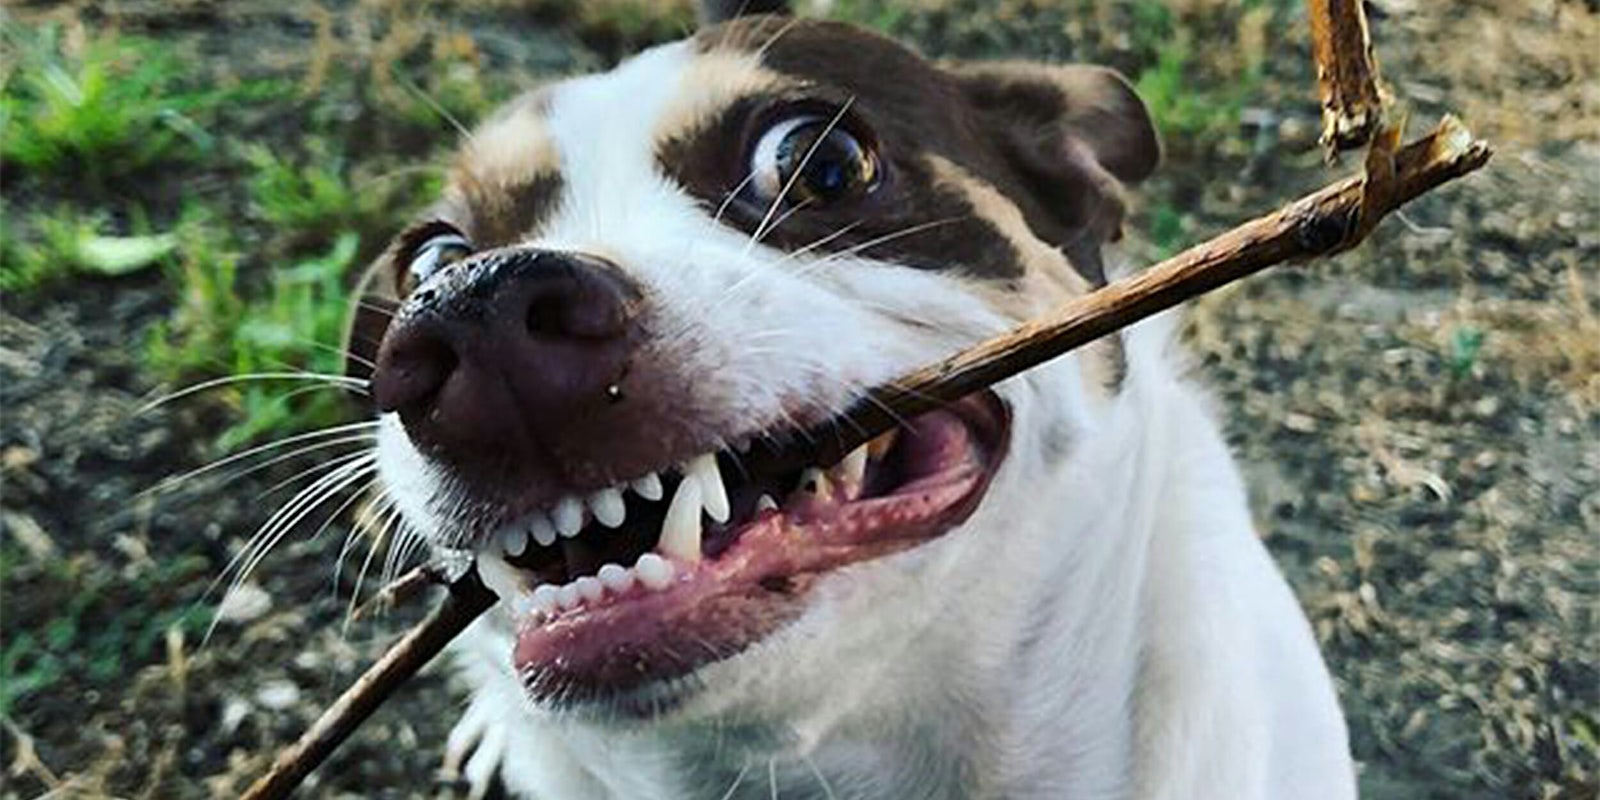 mister bubz with a stick in his mouth